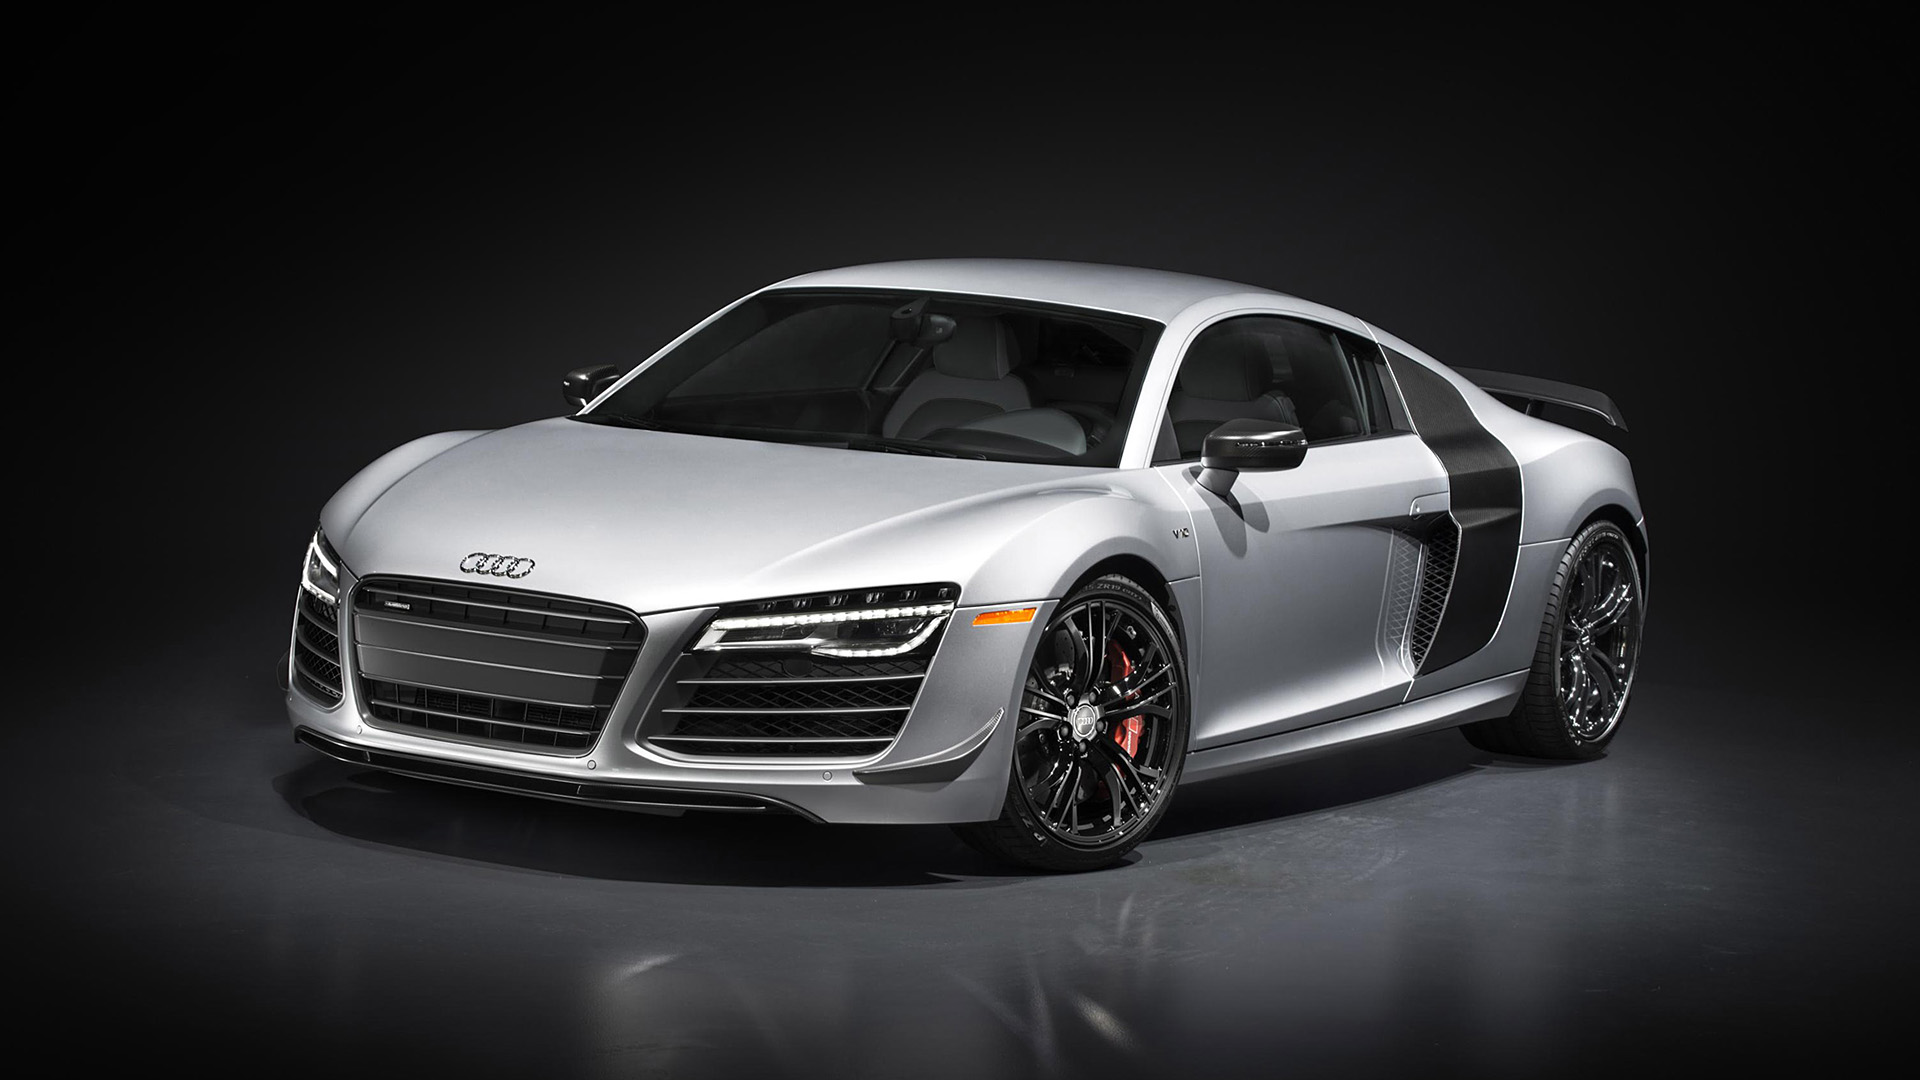  2015 Audi R8 Competition Wallpaper.